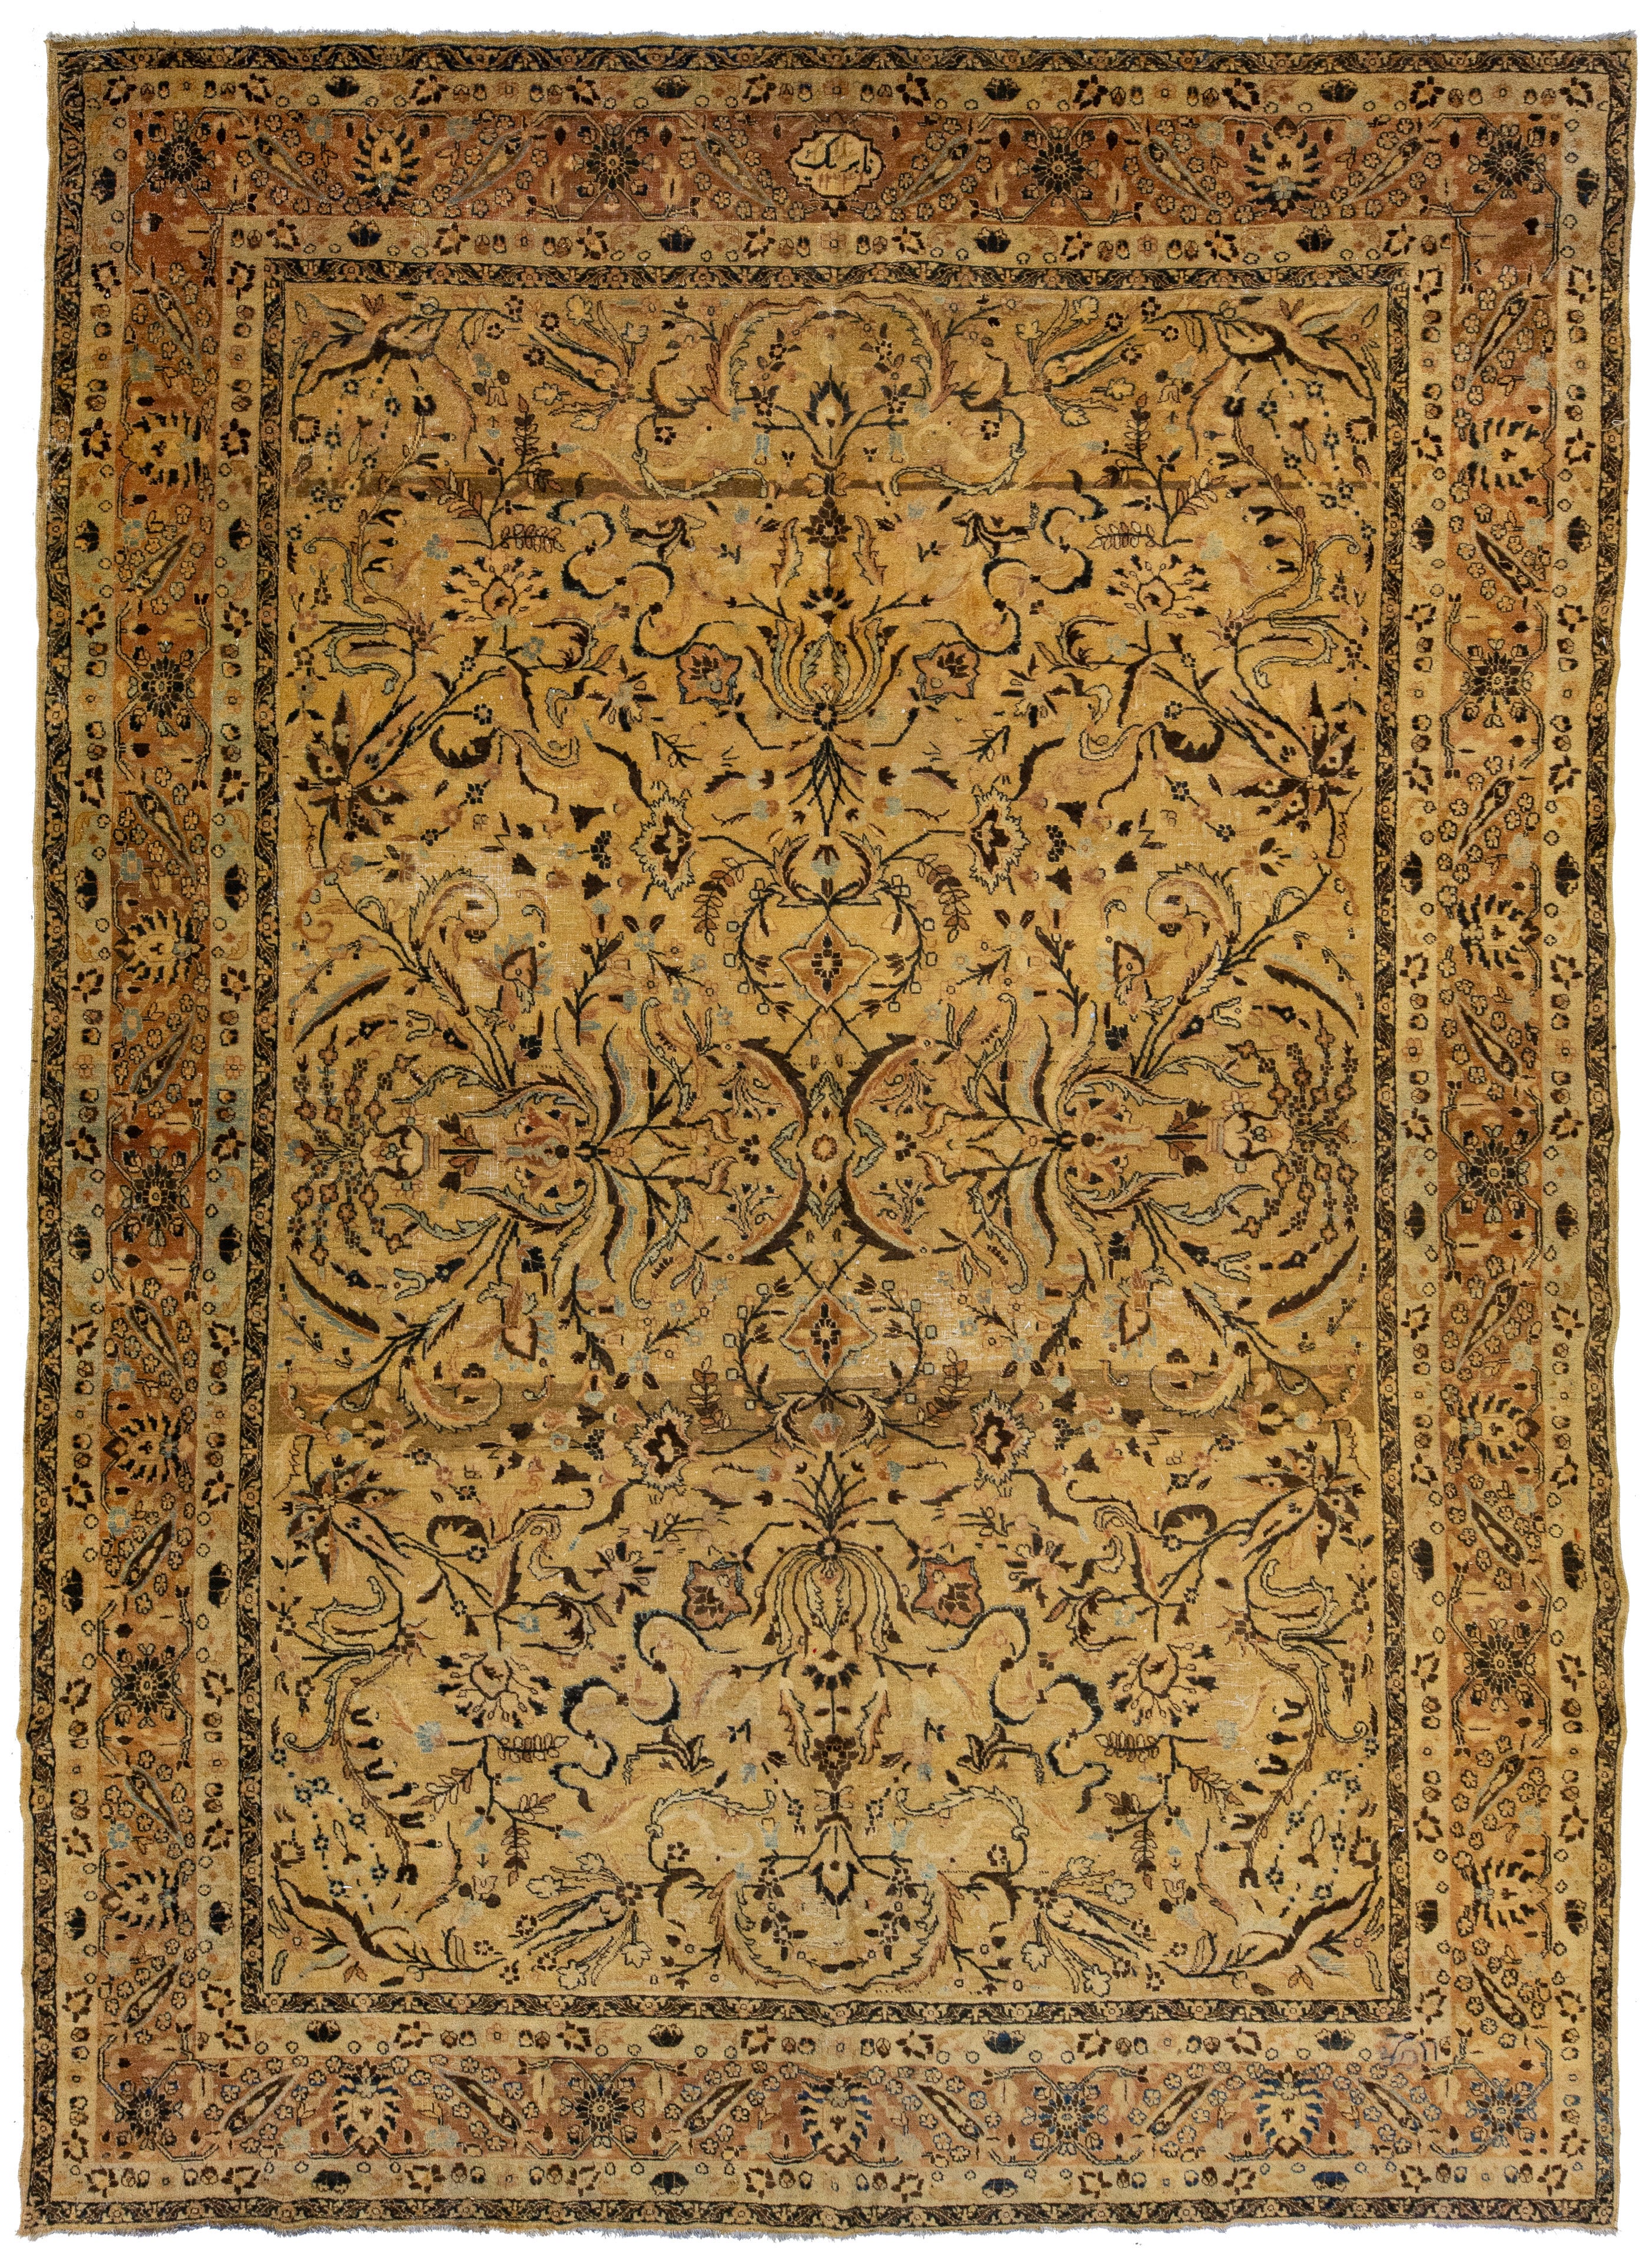 Antique Persian Tabriz Wool Rug With Allover Floral In Golden Color For Sale